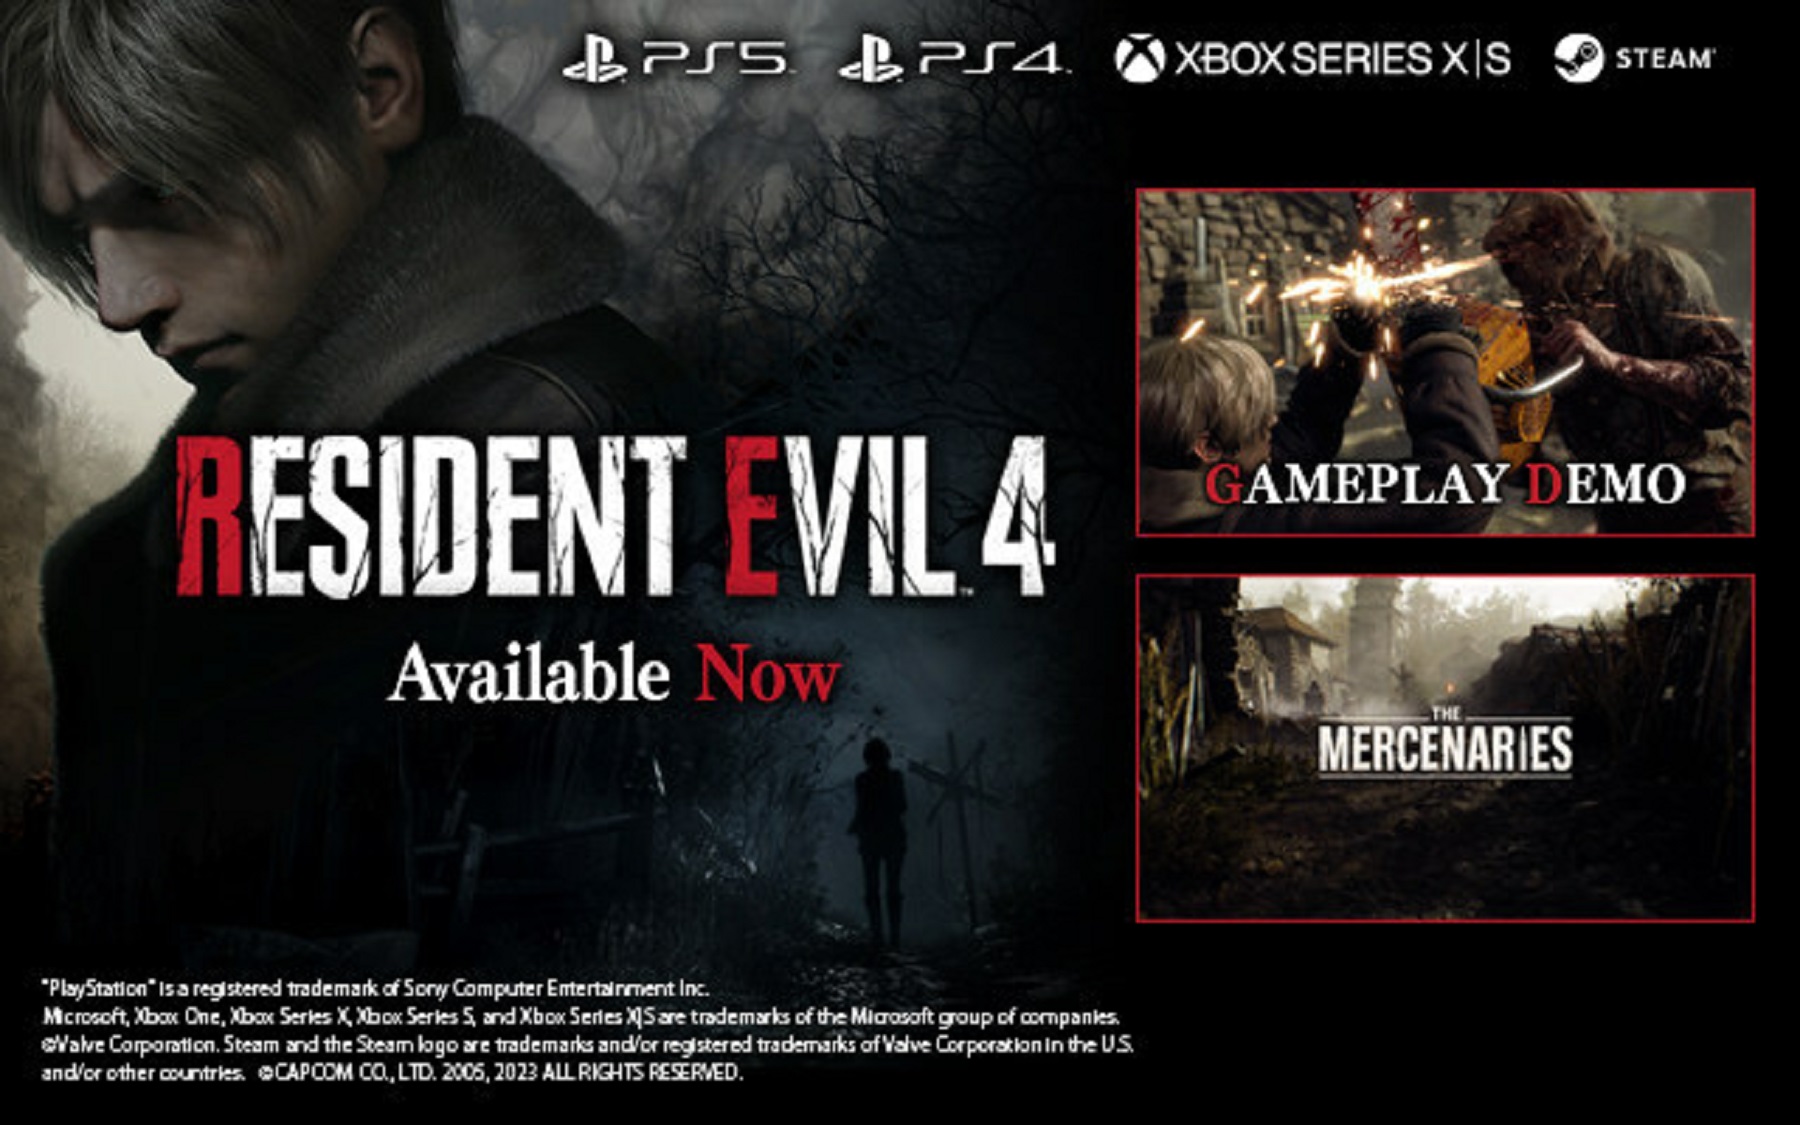 Resident Evil 4 released March 24th – Free Demo is also available for download